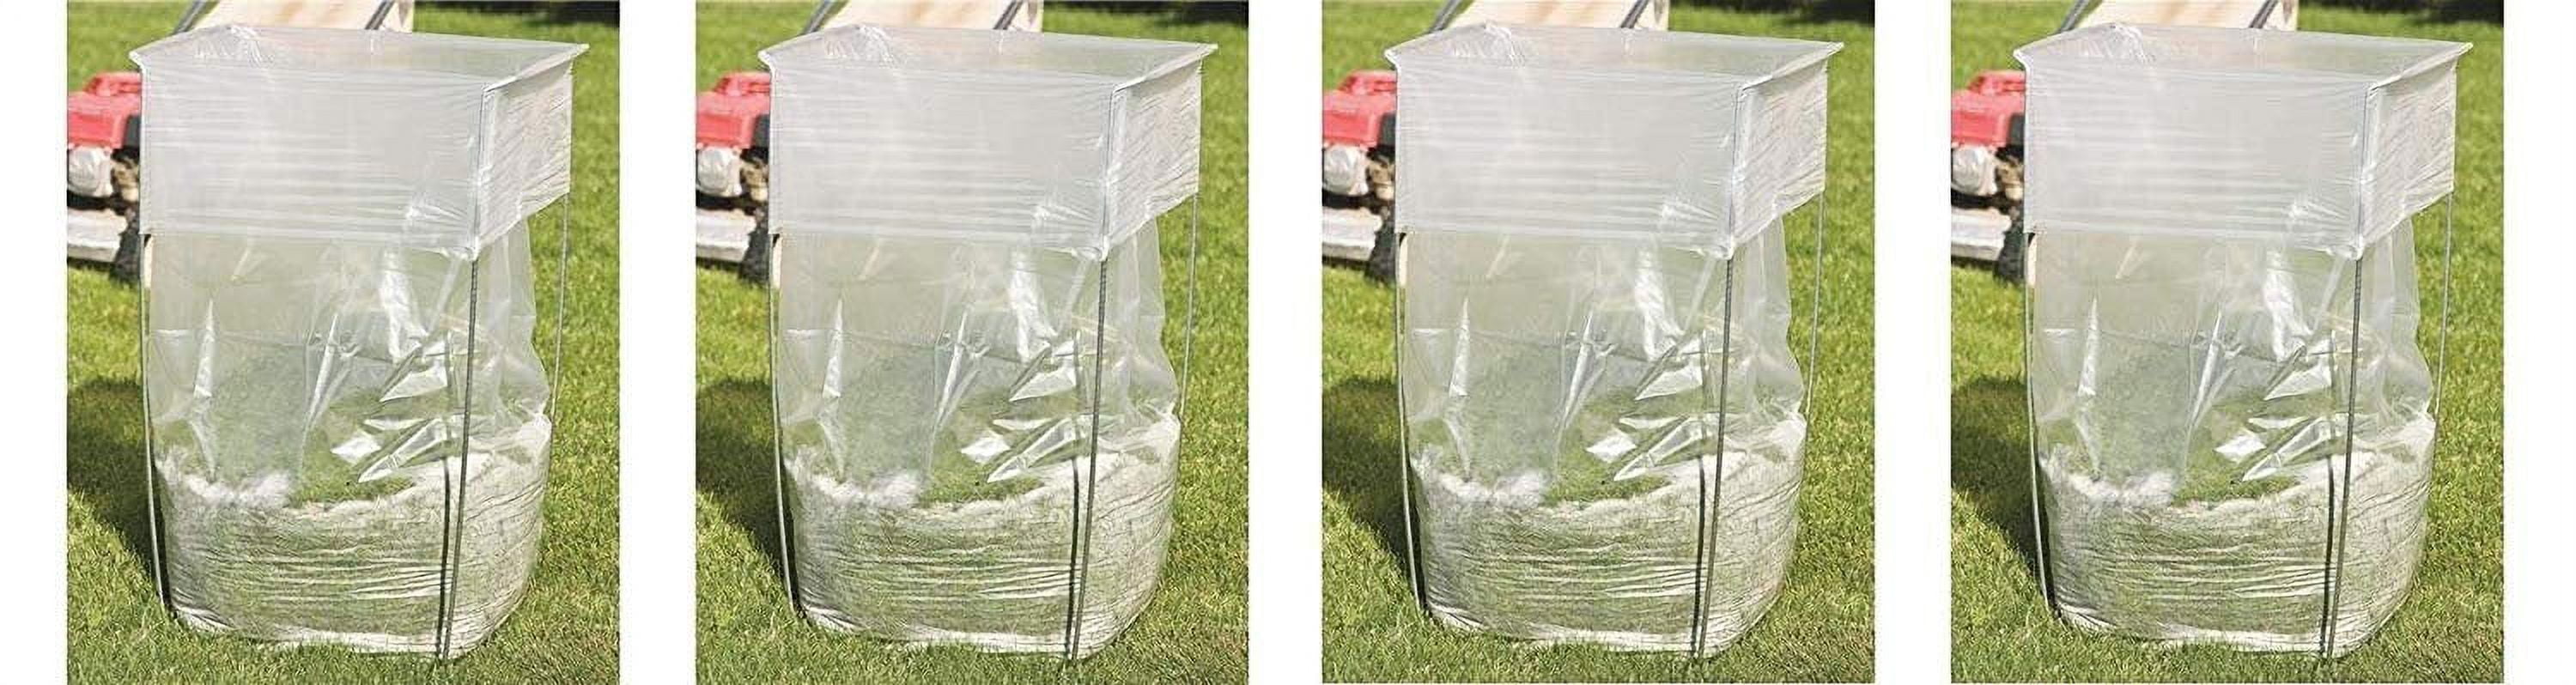 Two Level Bag Organizer Stand - Set of 4